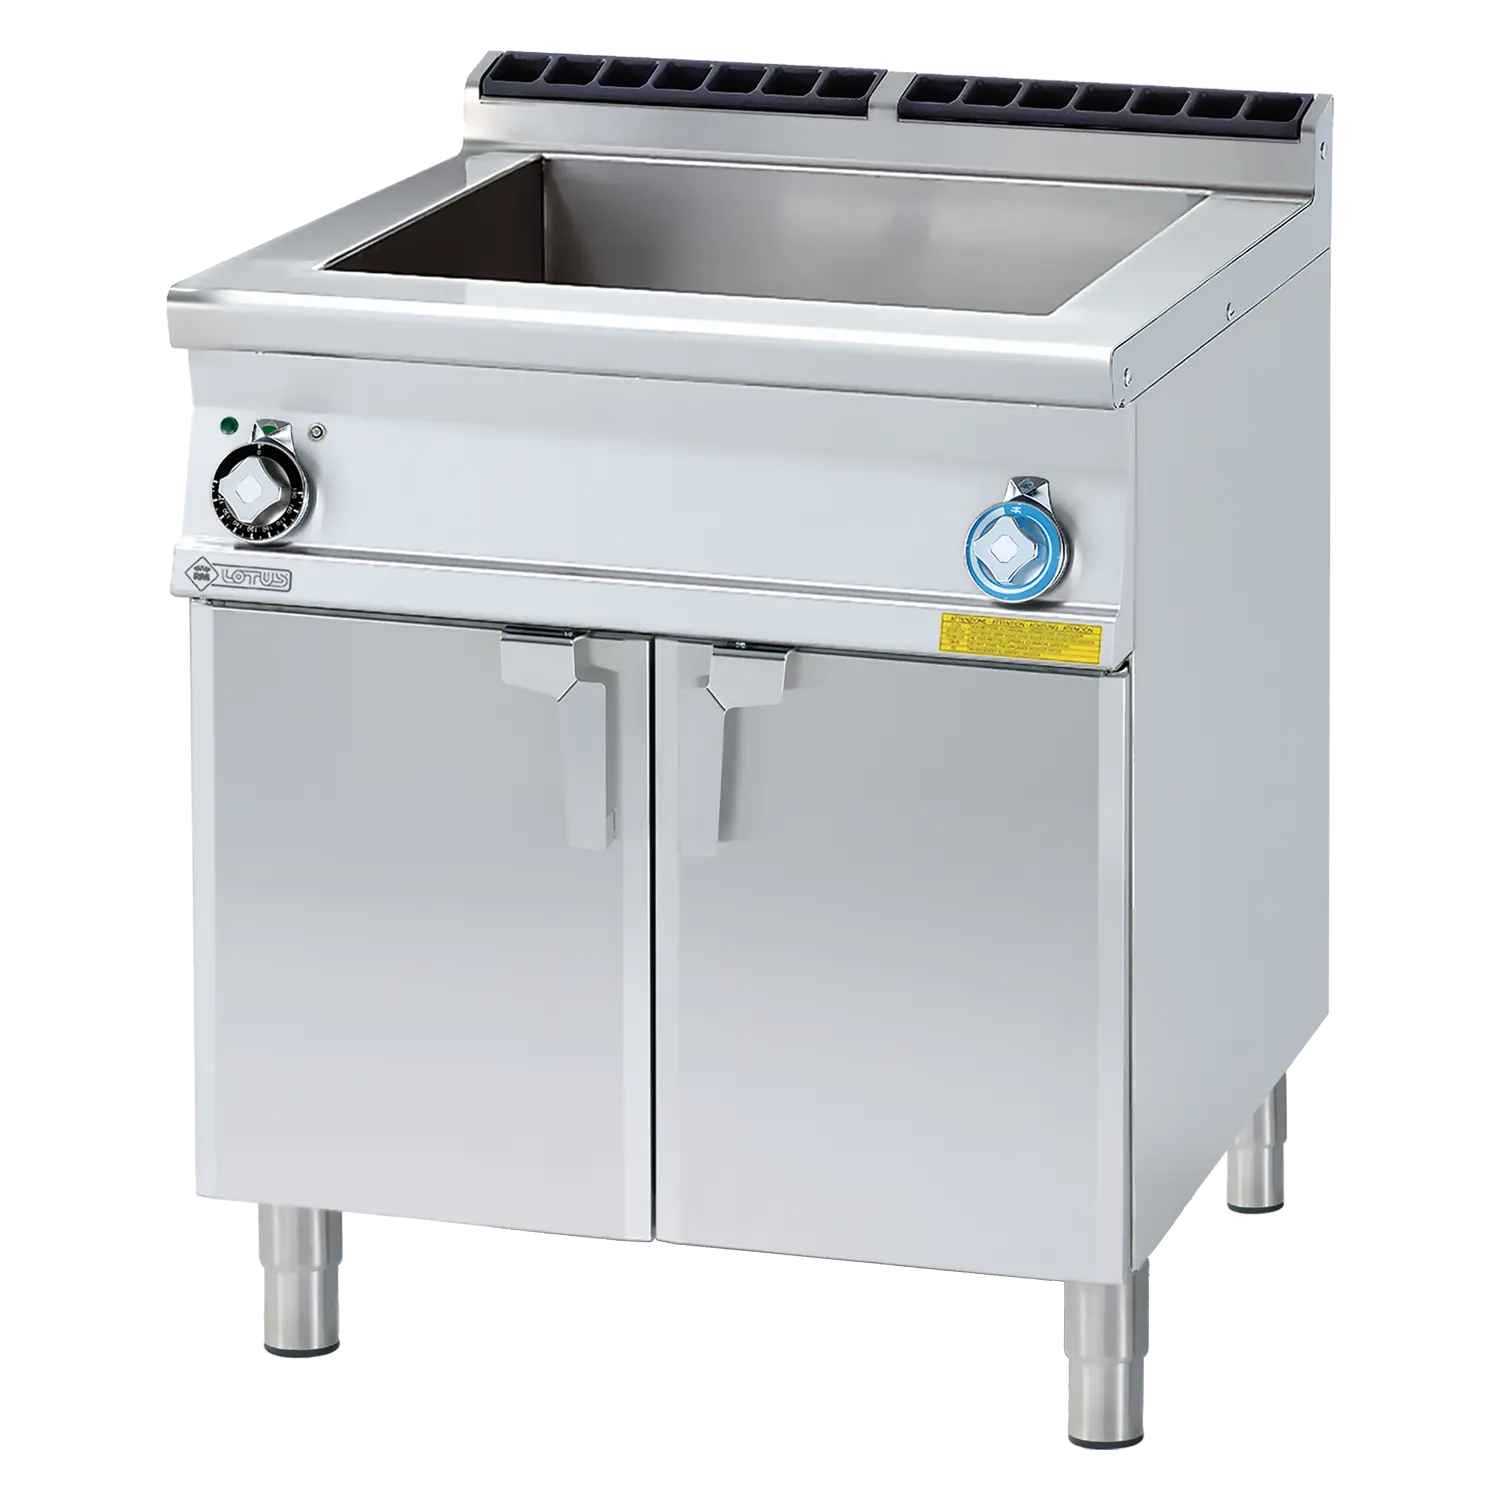 Bain marie electric GN 2/1 - 150 with cabinet | RM - BM-78ET